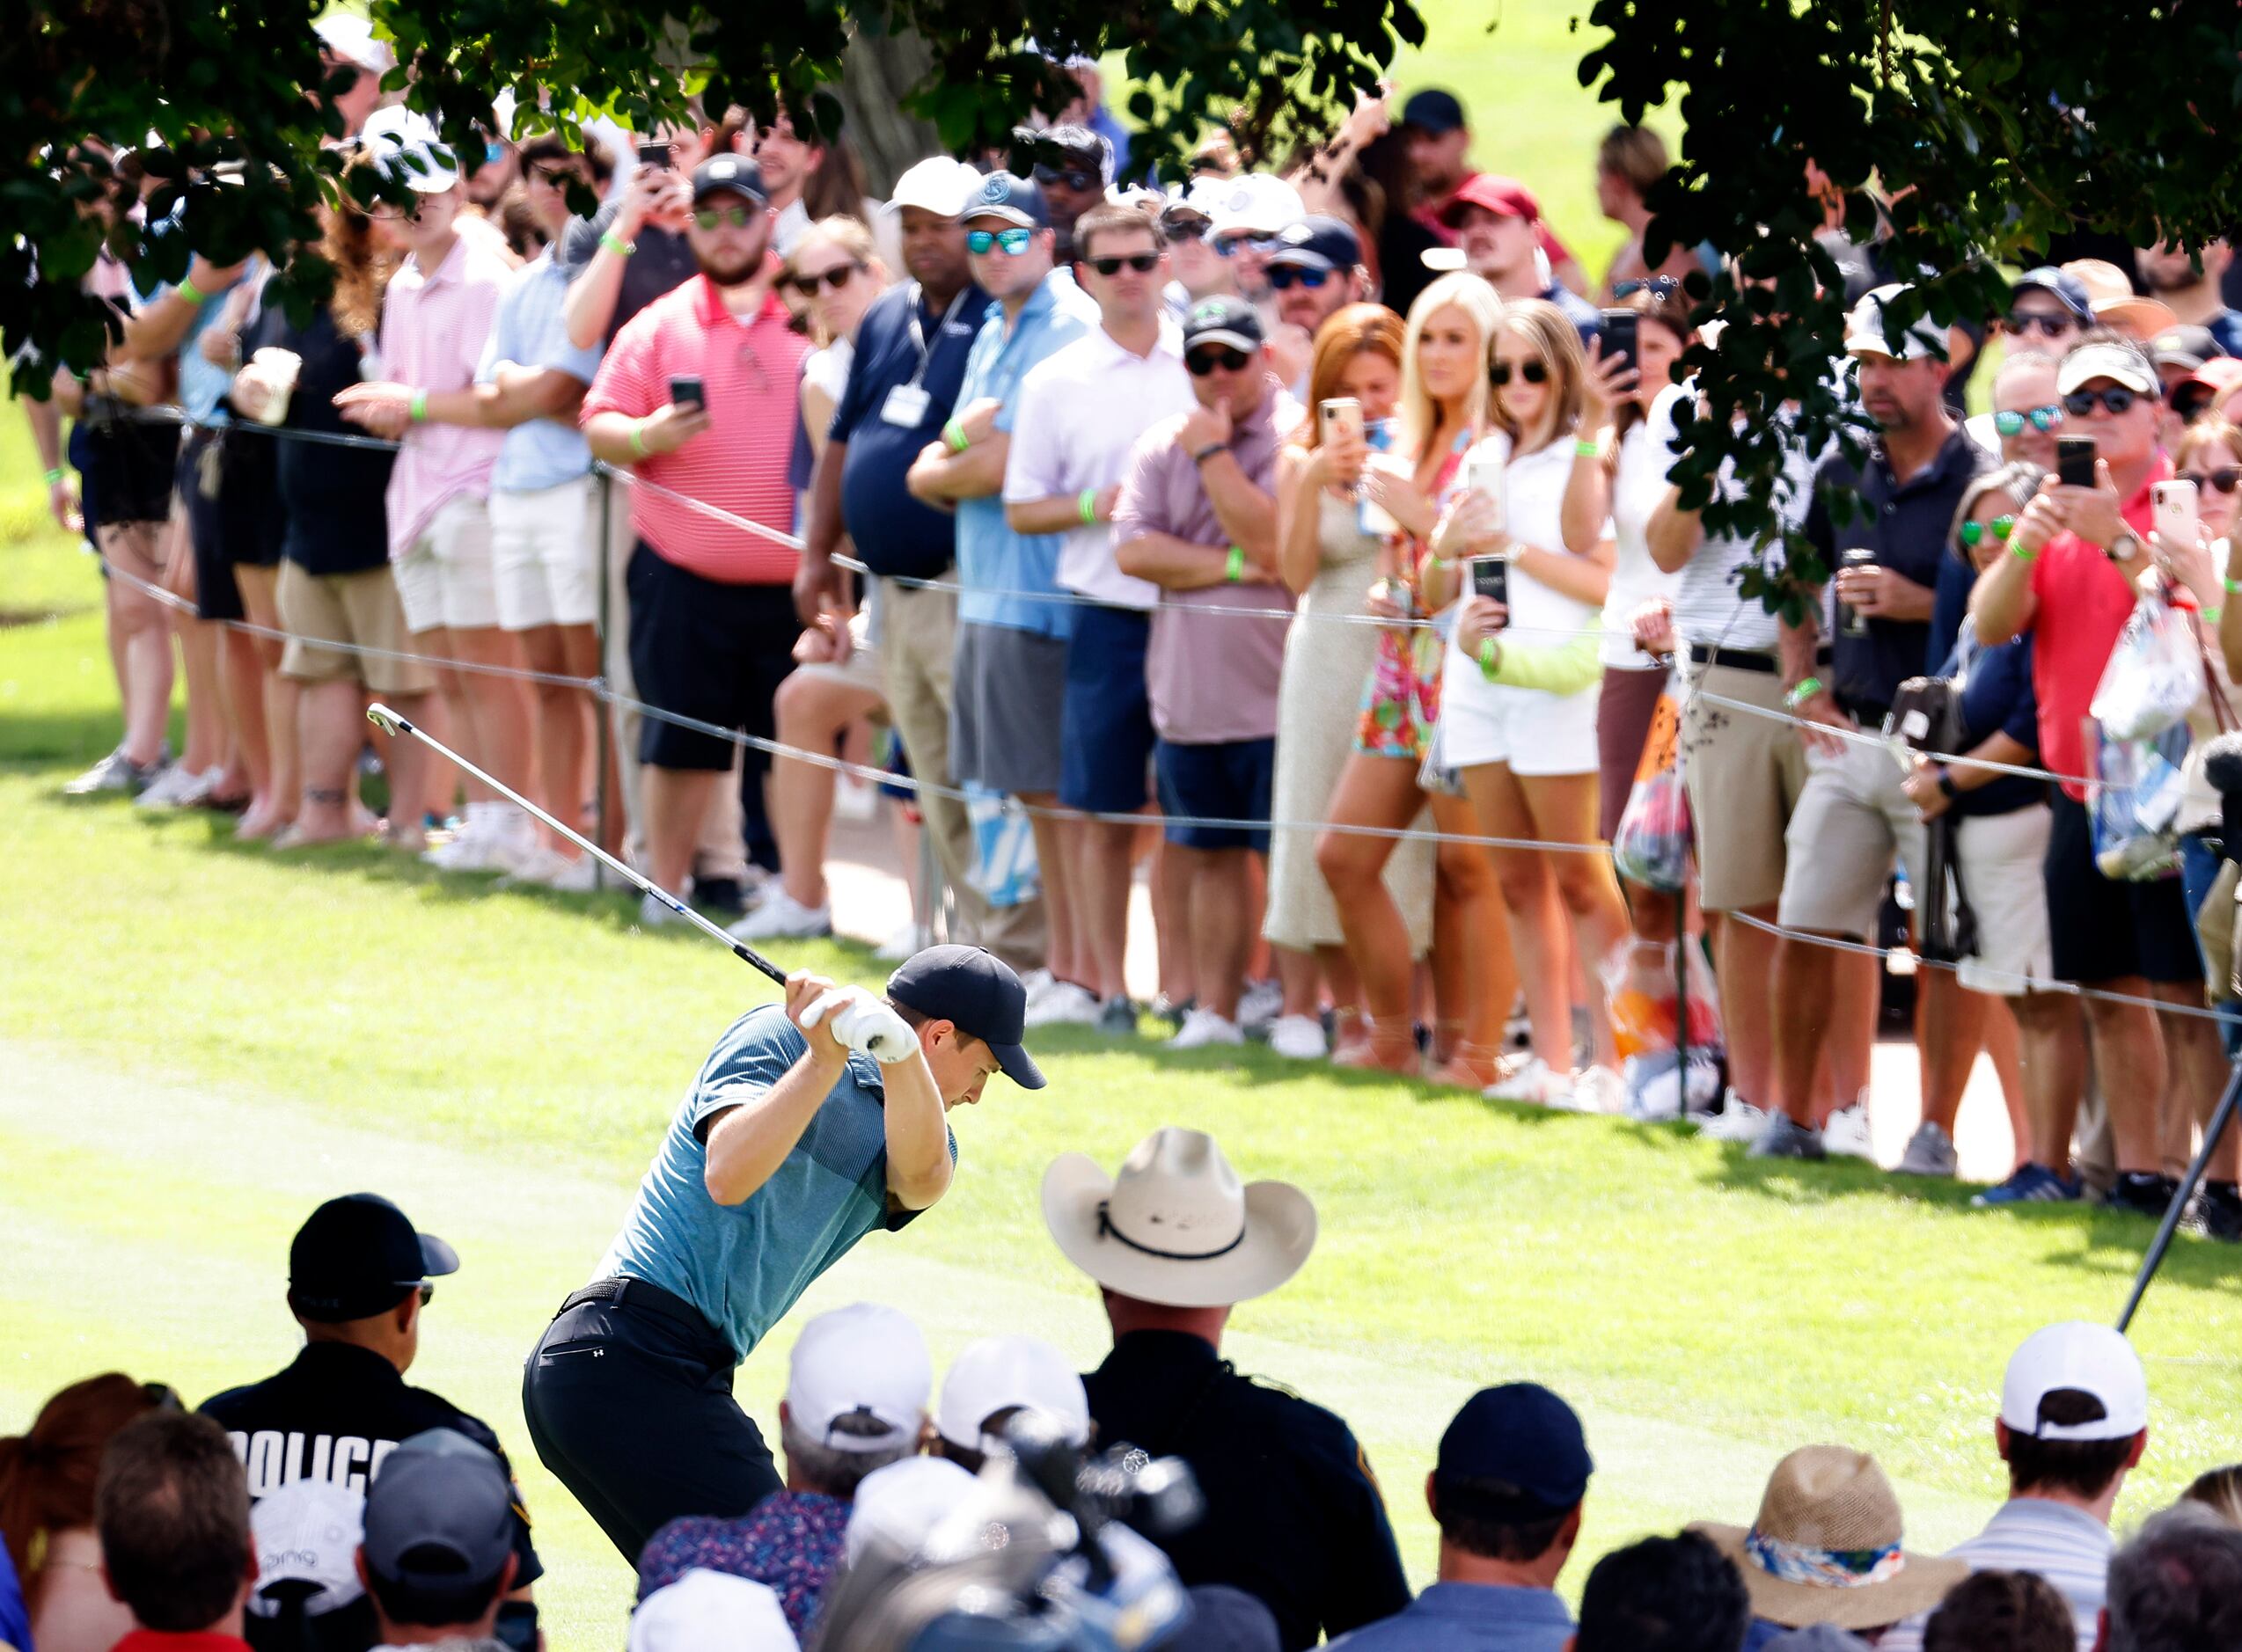 A large gallery followed professional golfer Jordan Spieth of Dallas as he teed off on No....